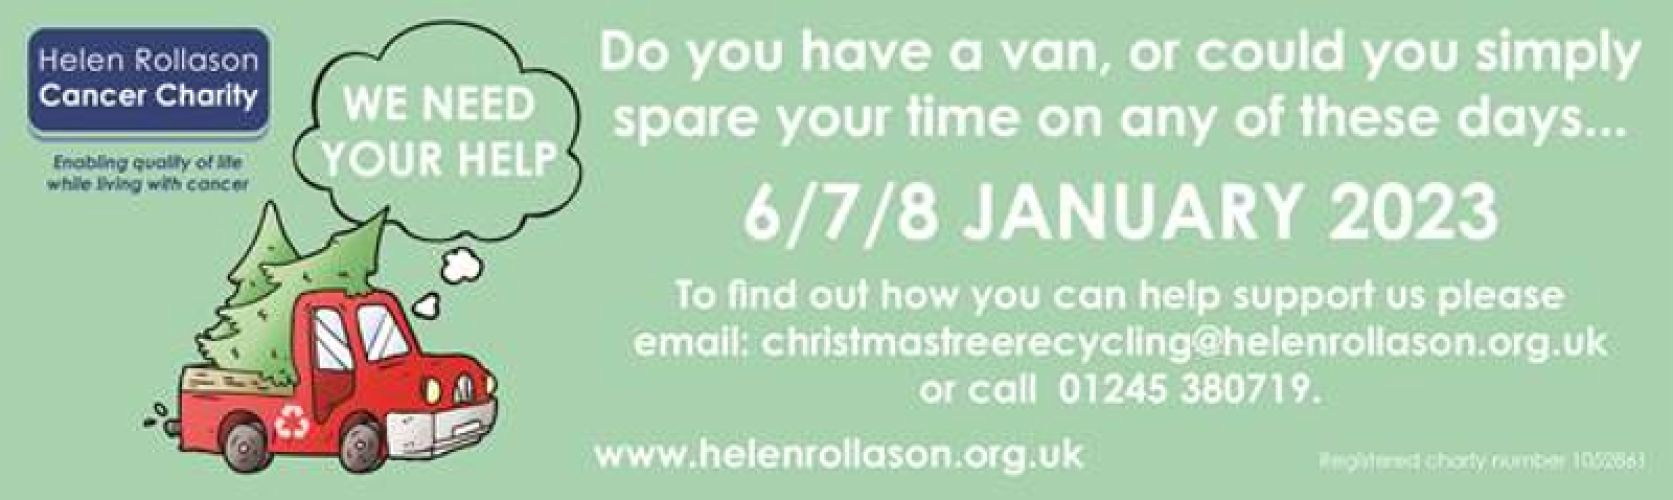 Helen Rollason Cancer Charity Christmas Tree Recycling Campaign